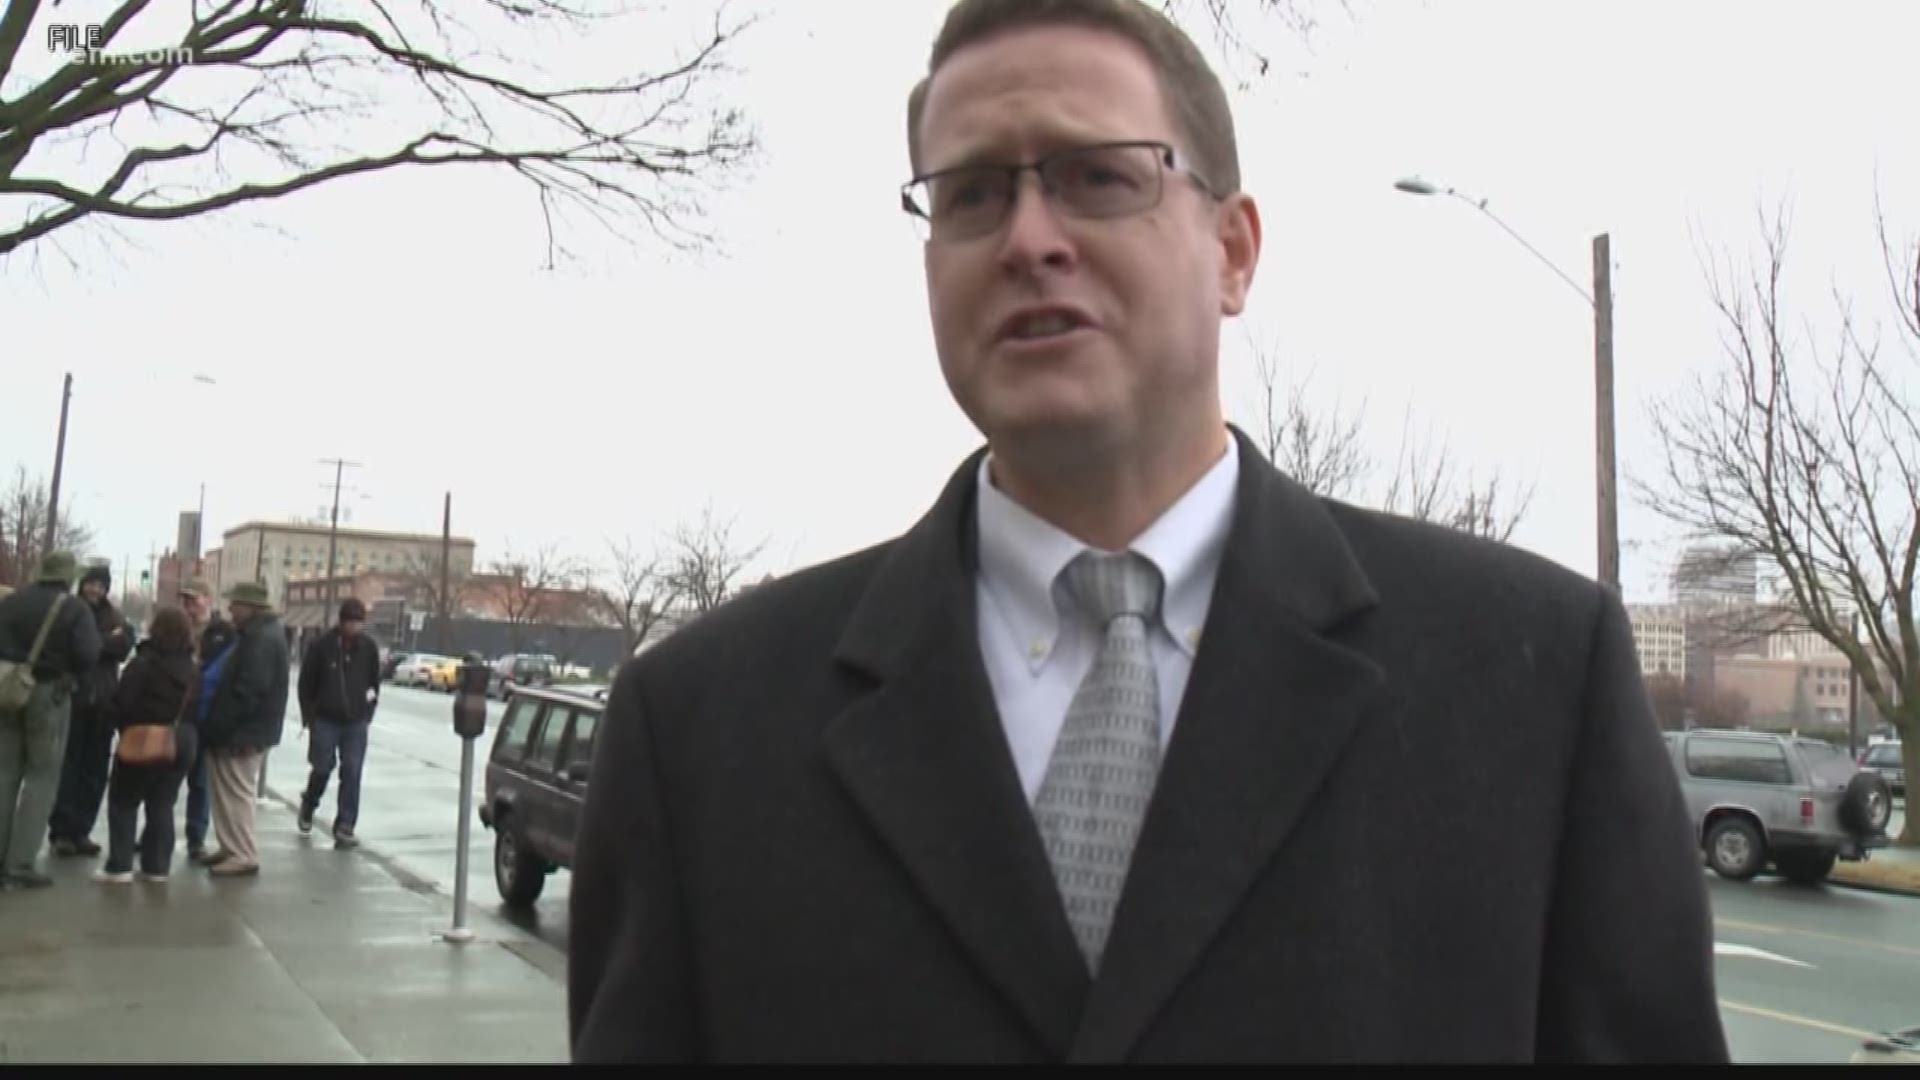 KREM's Taylor Viydo explores what's in store for Rep. Matt Shea after local leaders and groups have called for his resignation following new reporting about his ties to a 'biblical warfare' group.